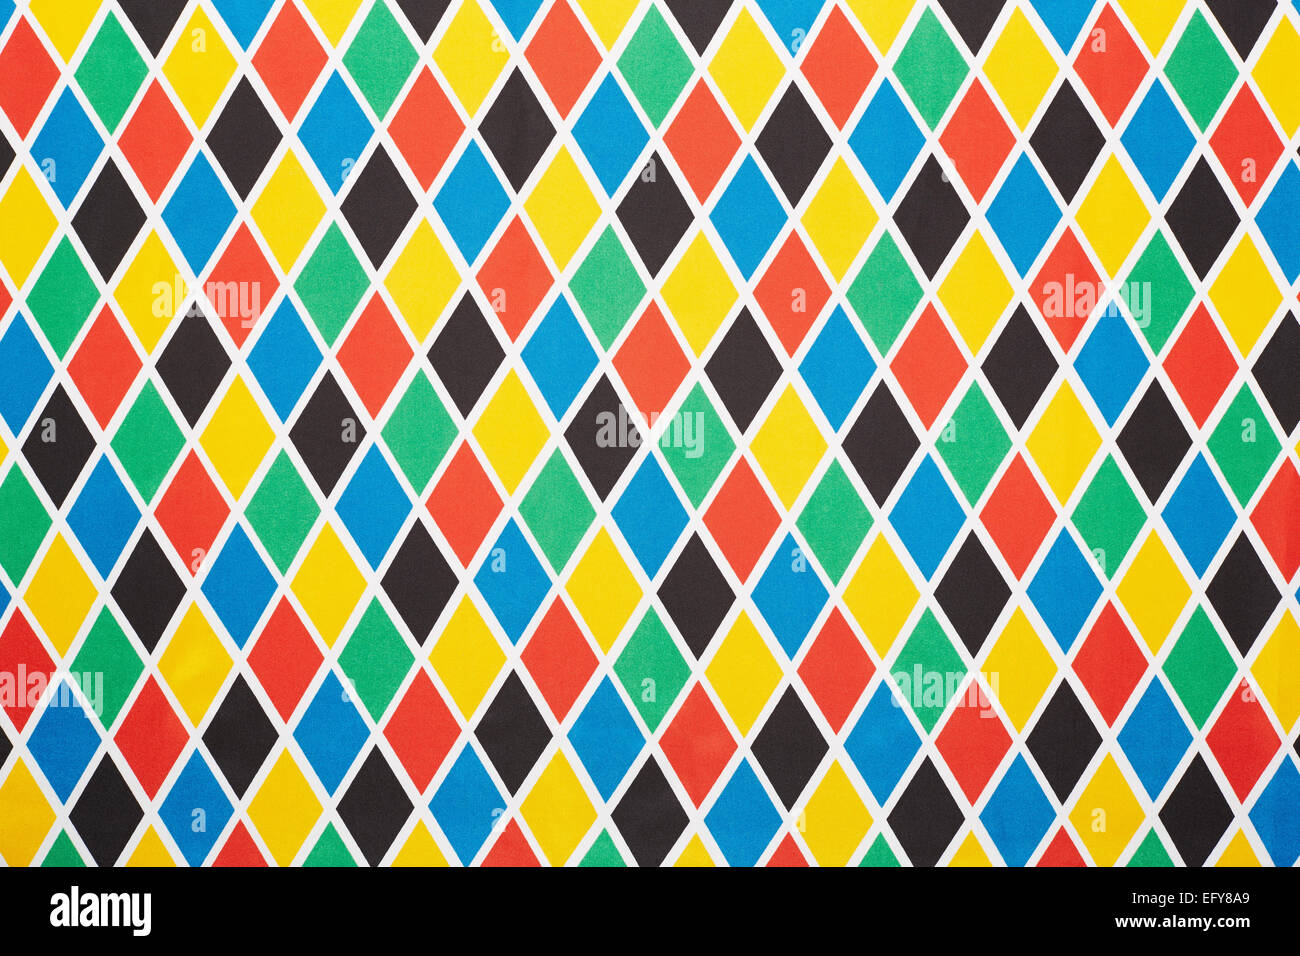 Harlequin colorful diamond pattern, texture background Stock Photo